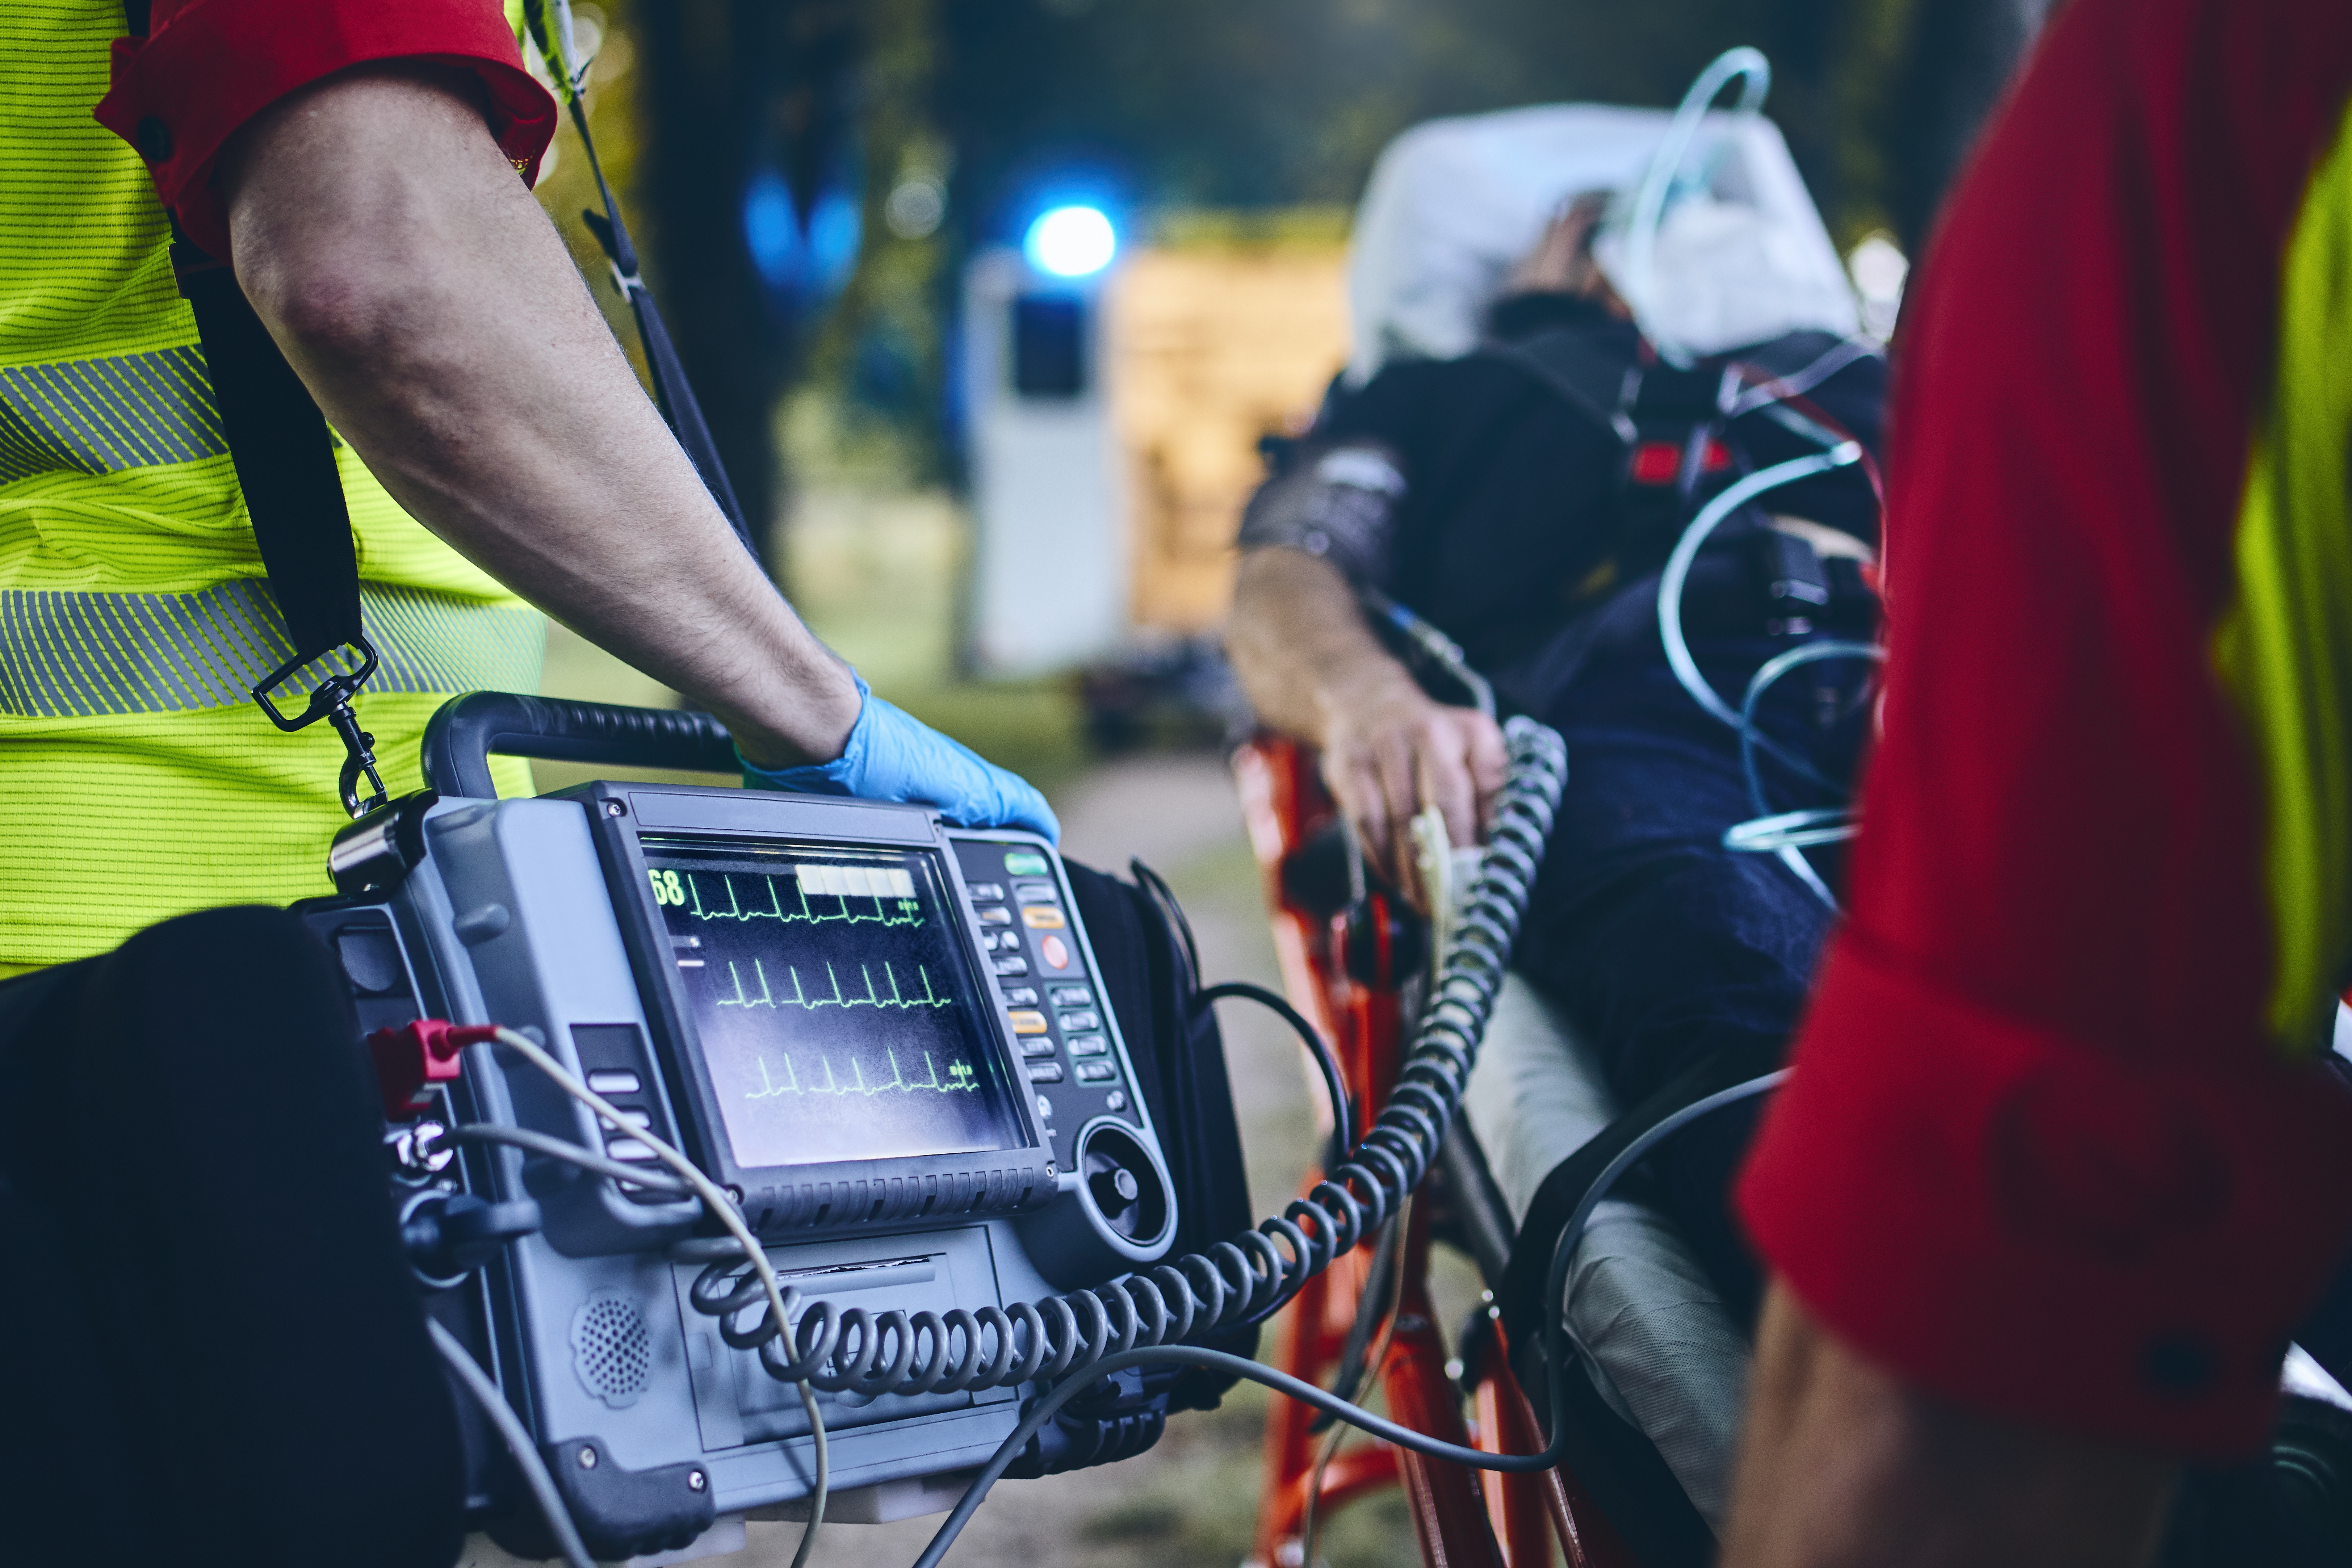 A first responder uses emergency services technology